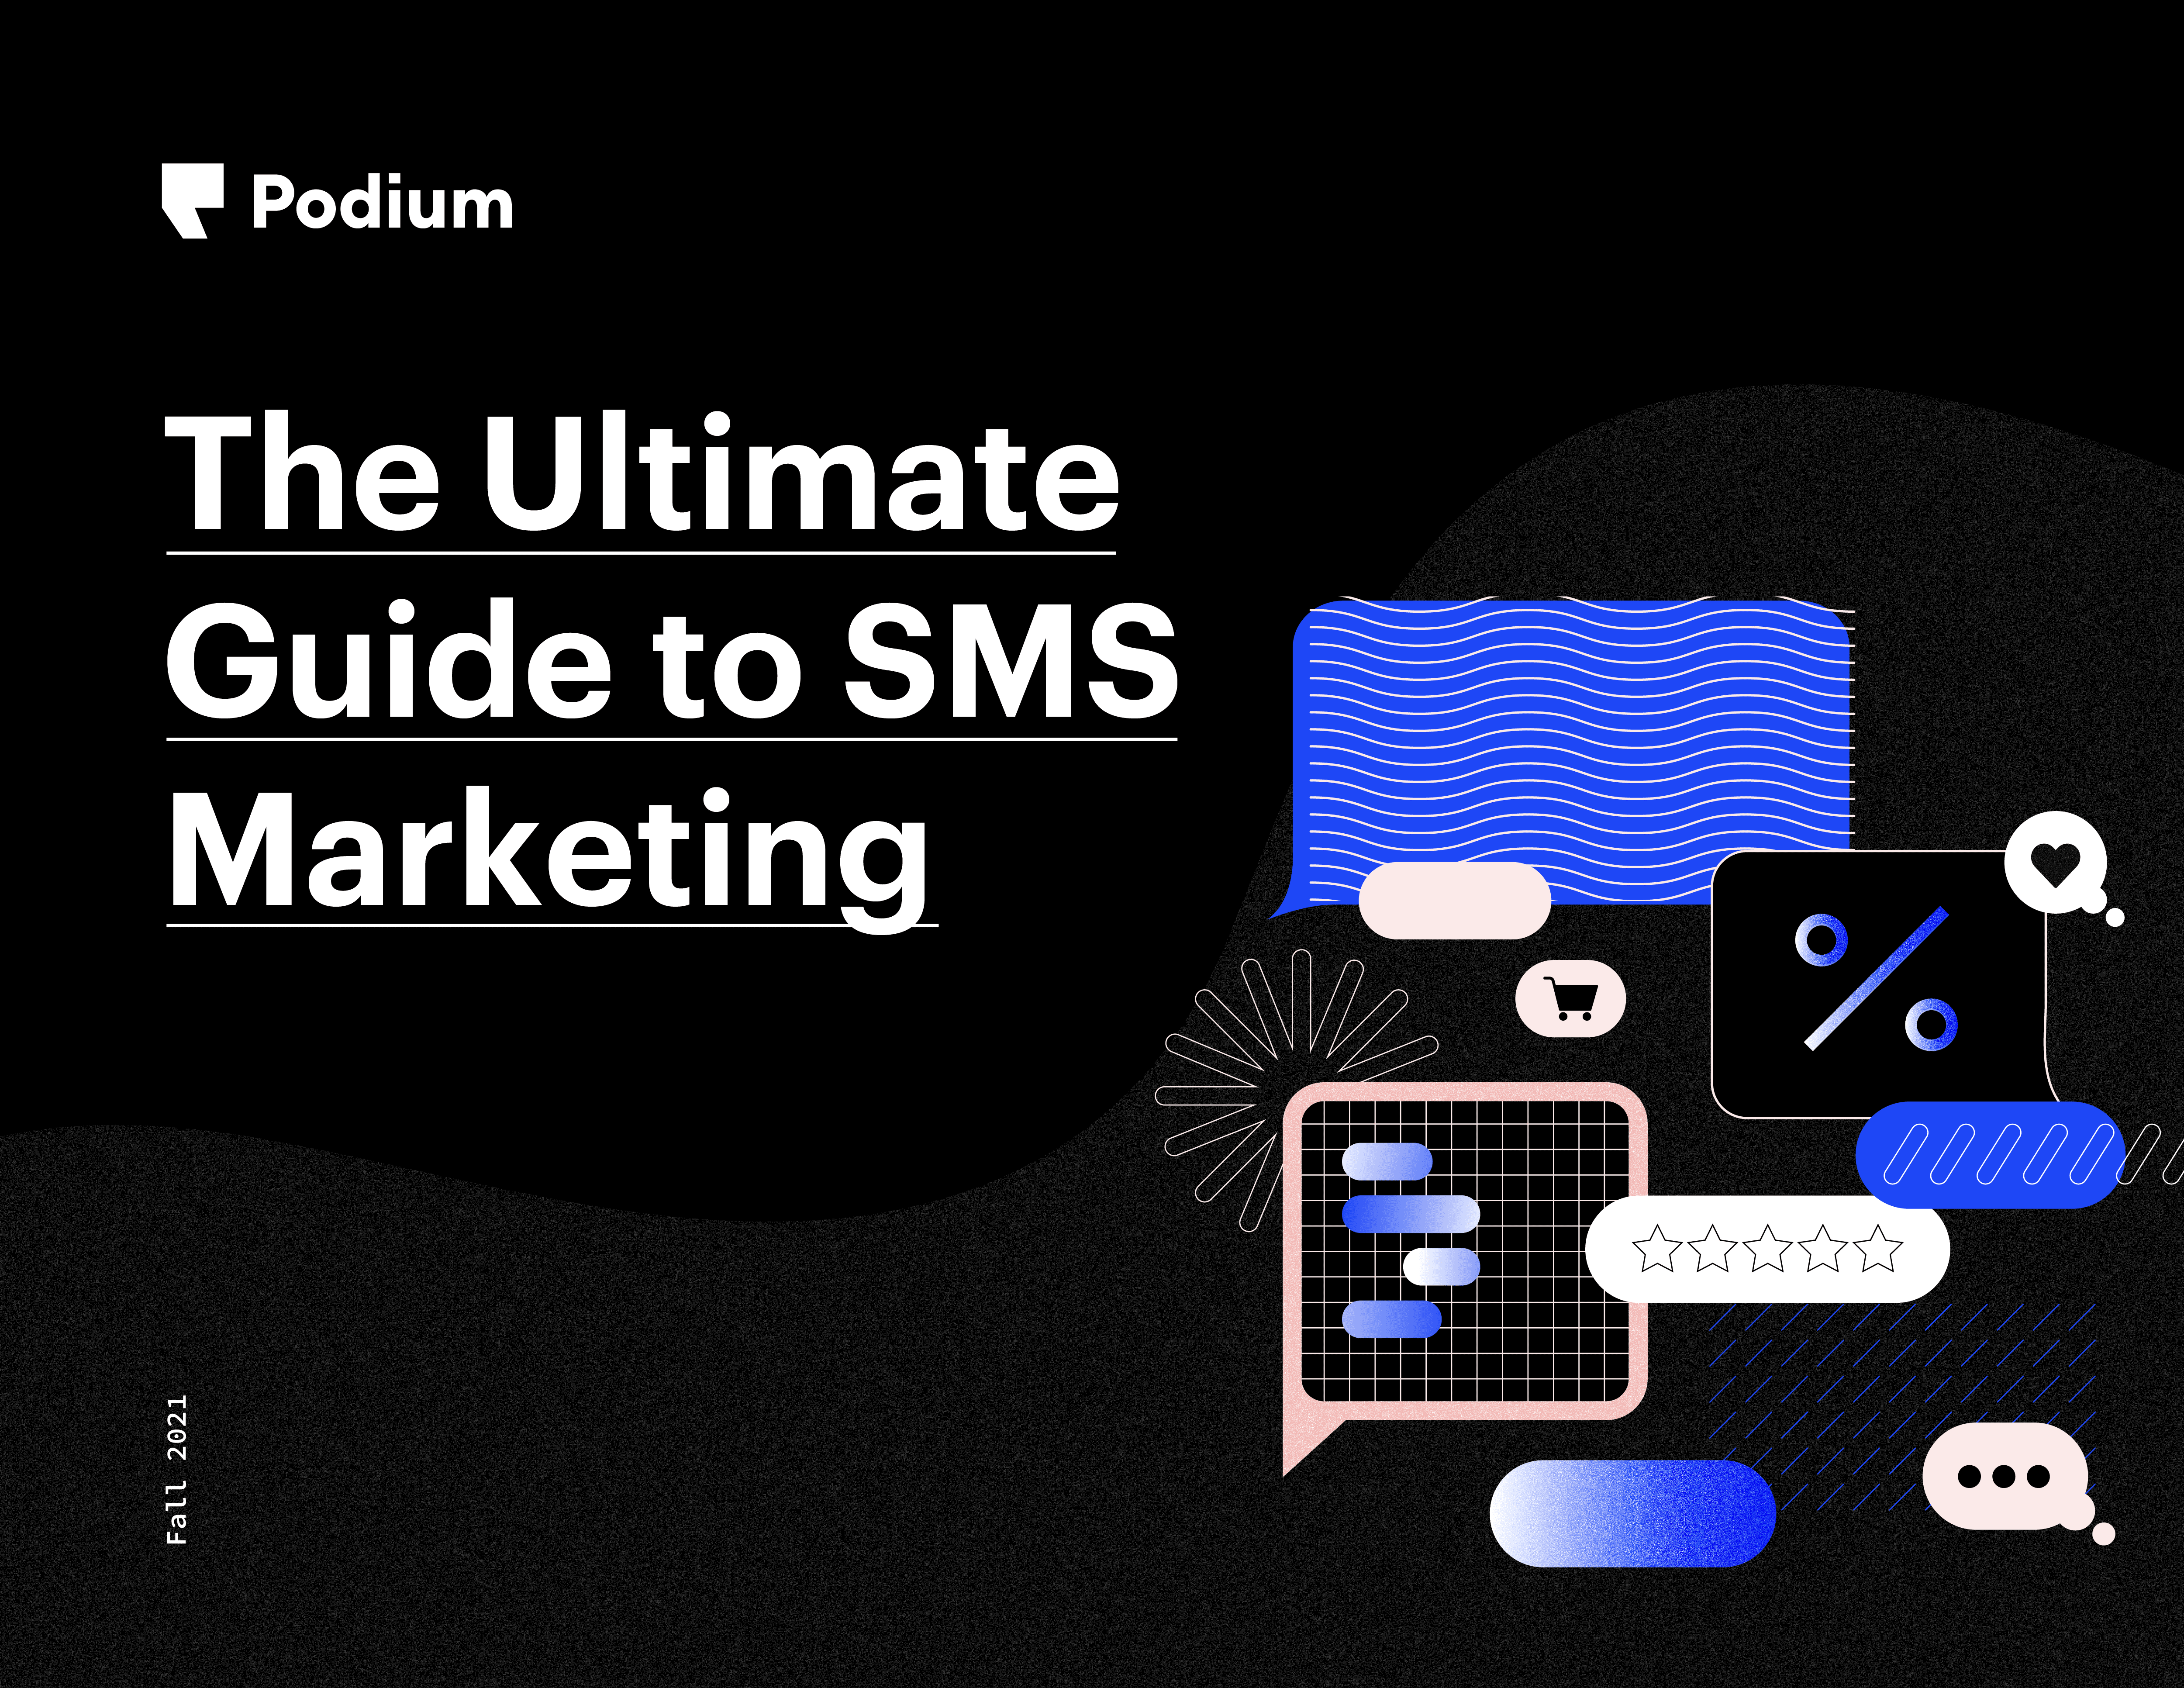 The Ultimate Guide to SMS Marketing